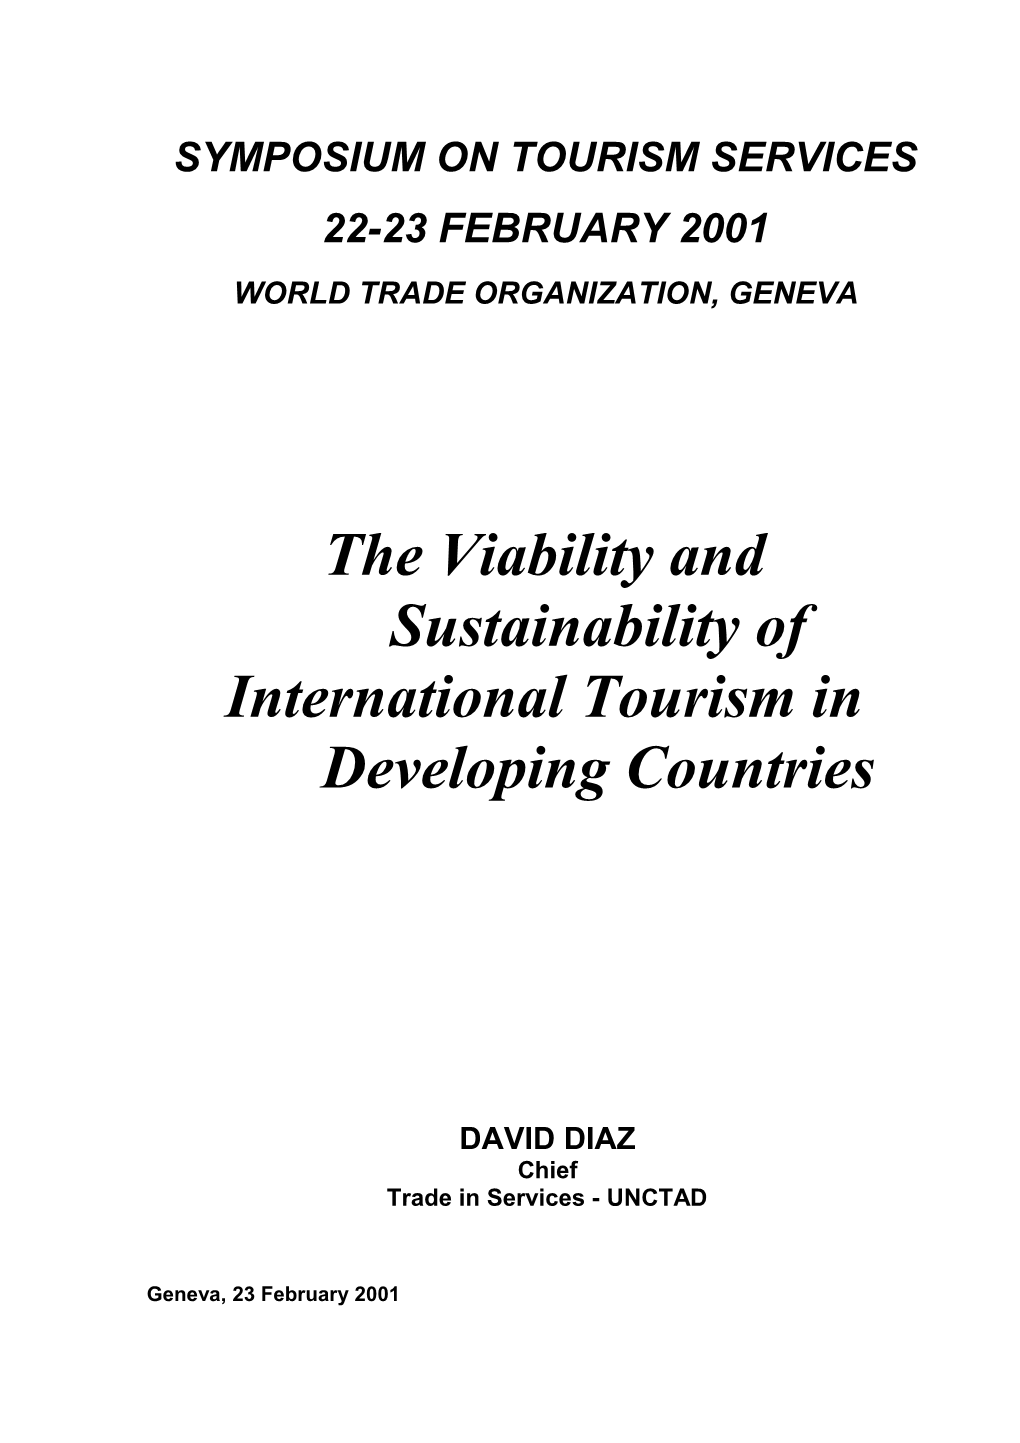 The Viability and Sustainability of International Tourism in Developing Countries